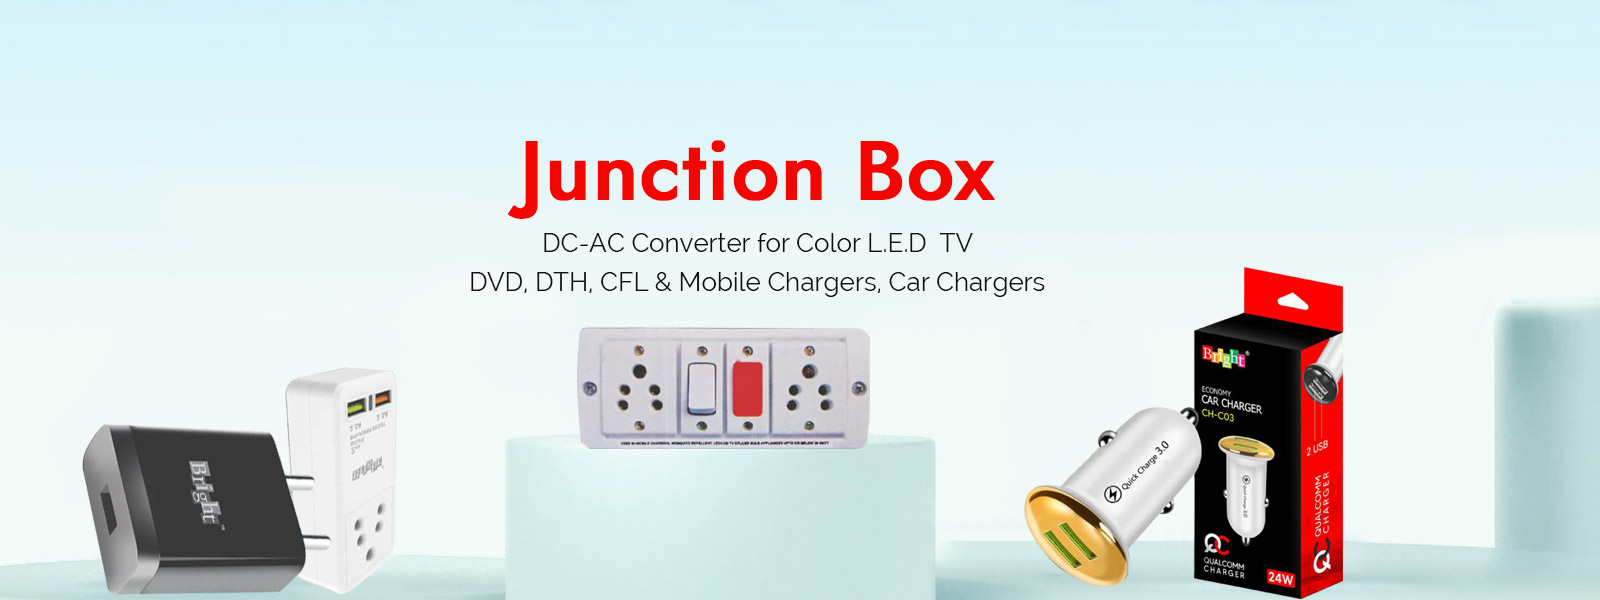 Junction Box Manufacturers in Chandni Chowk